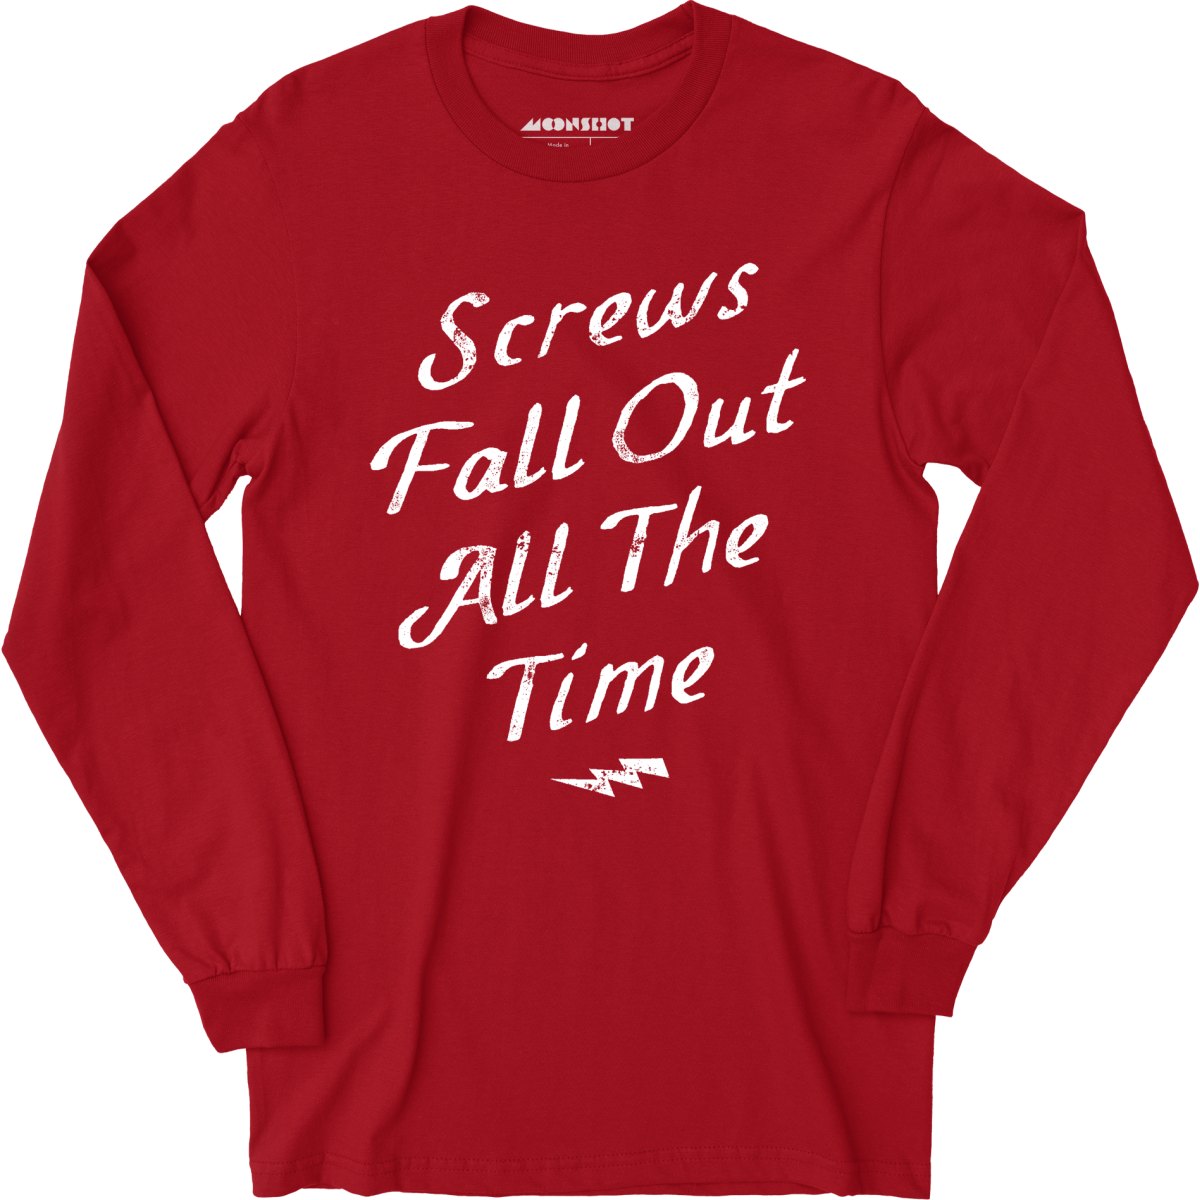 Screws Fall Out All The Time - Long Sleeve T-Shirt